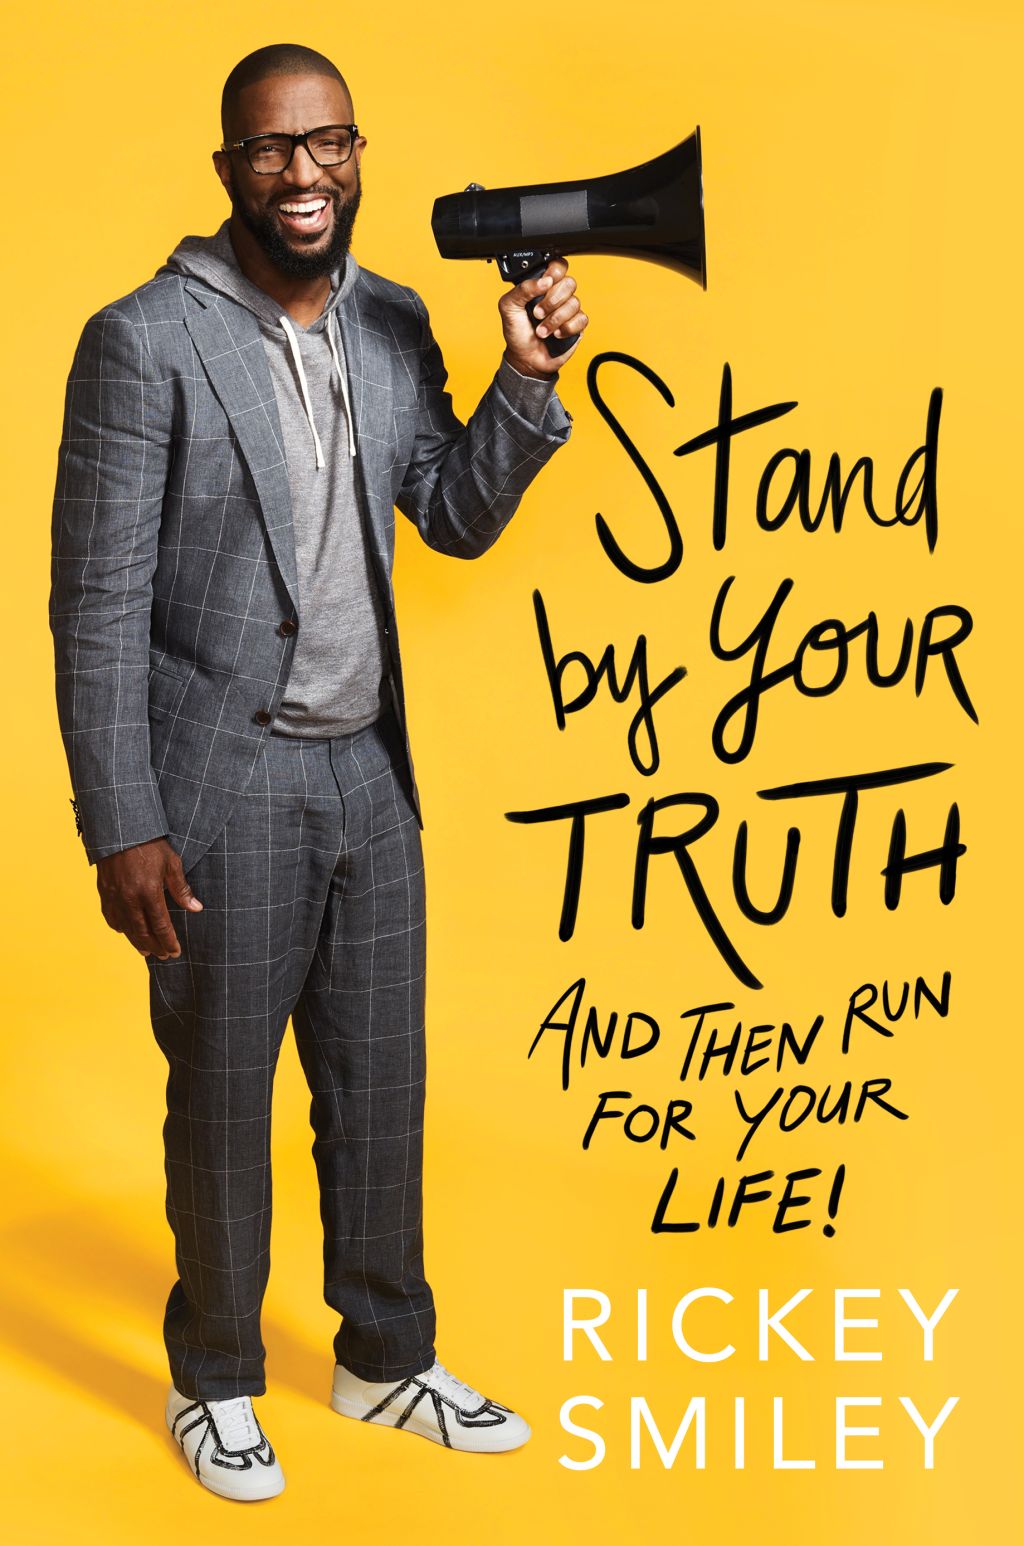 Rickey Smiley Stand By Your Truth And Then Run For Your Life book cover